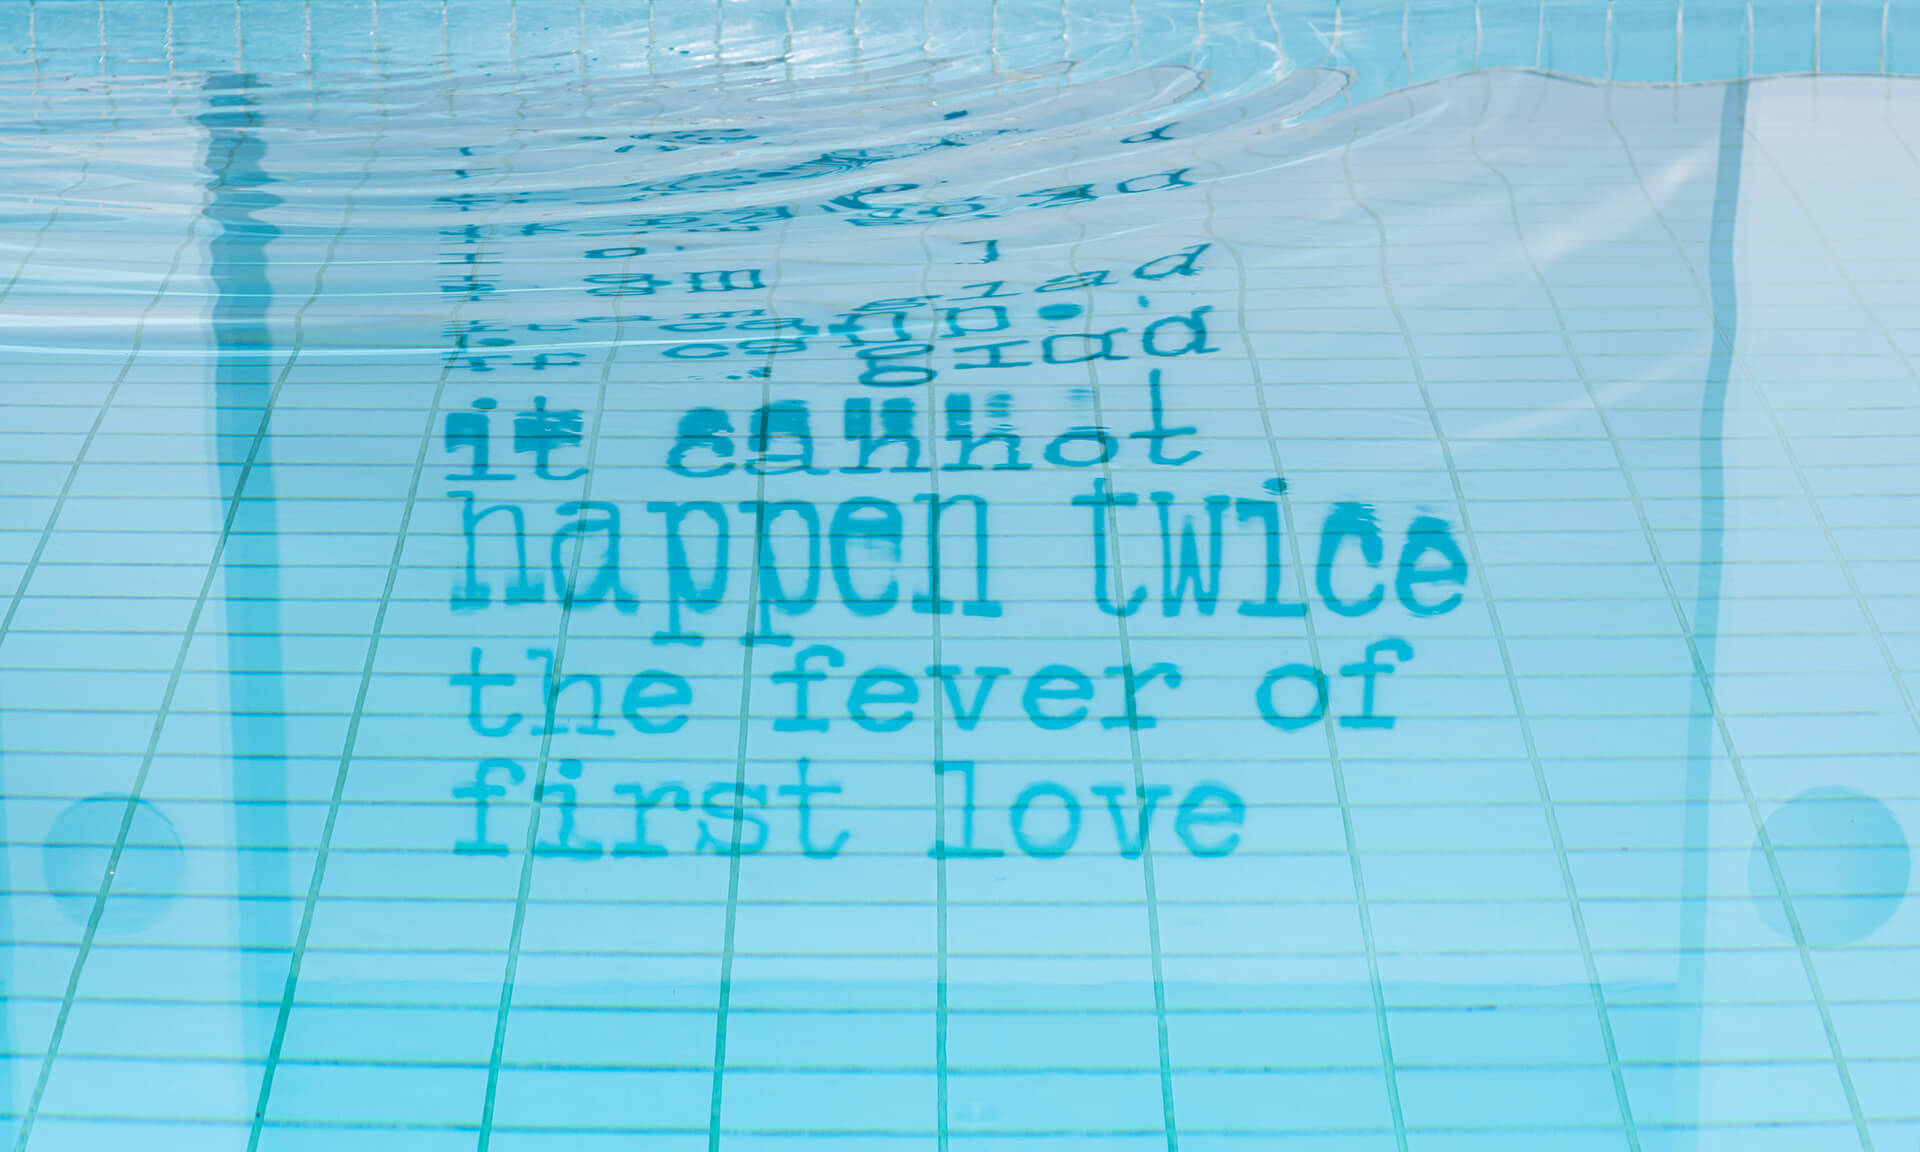 I am so glad it cannot happen twice the fever of first love